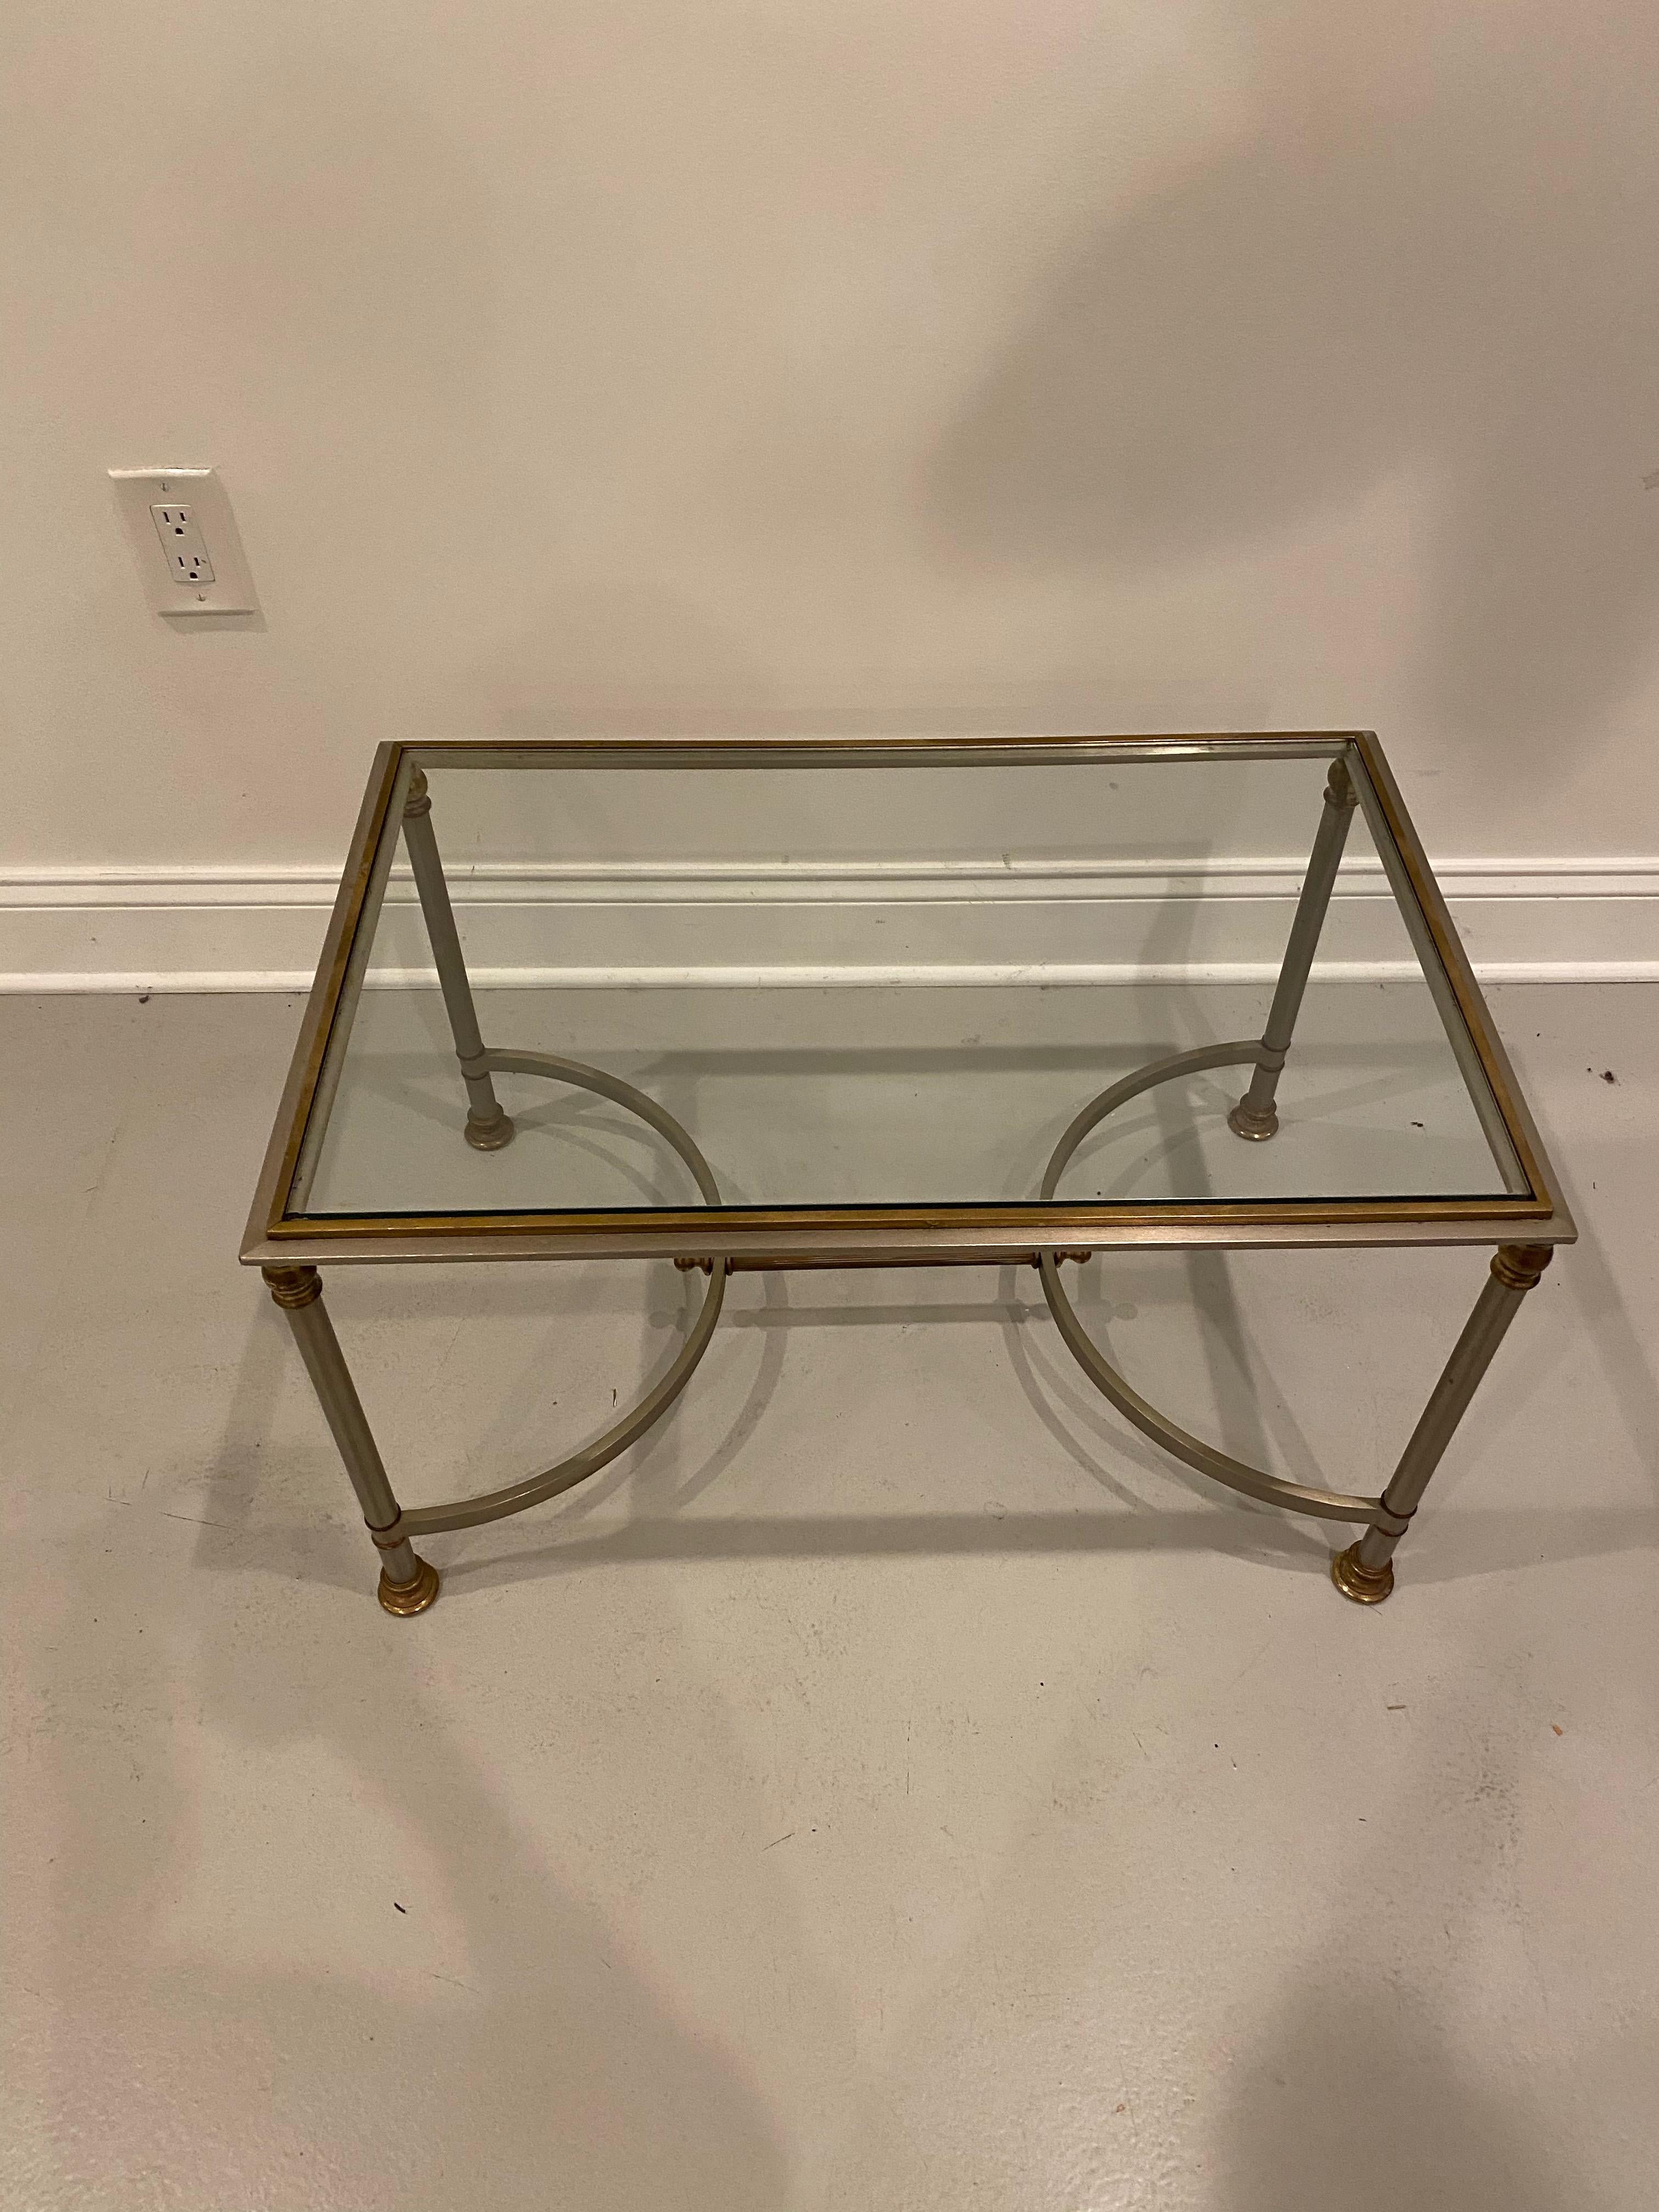 Mid-Century Modern coffee table. The bass is brass with a glass top.